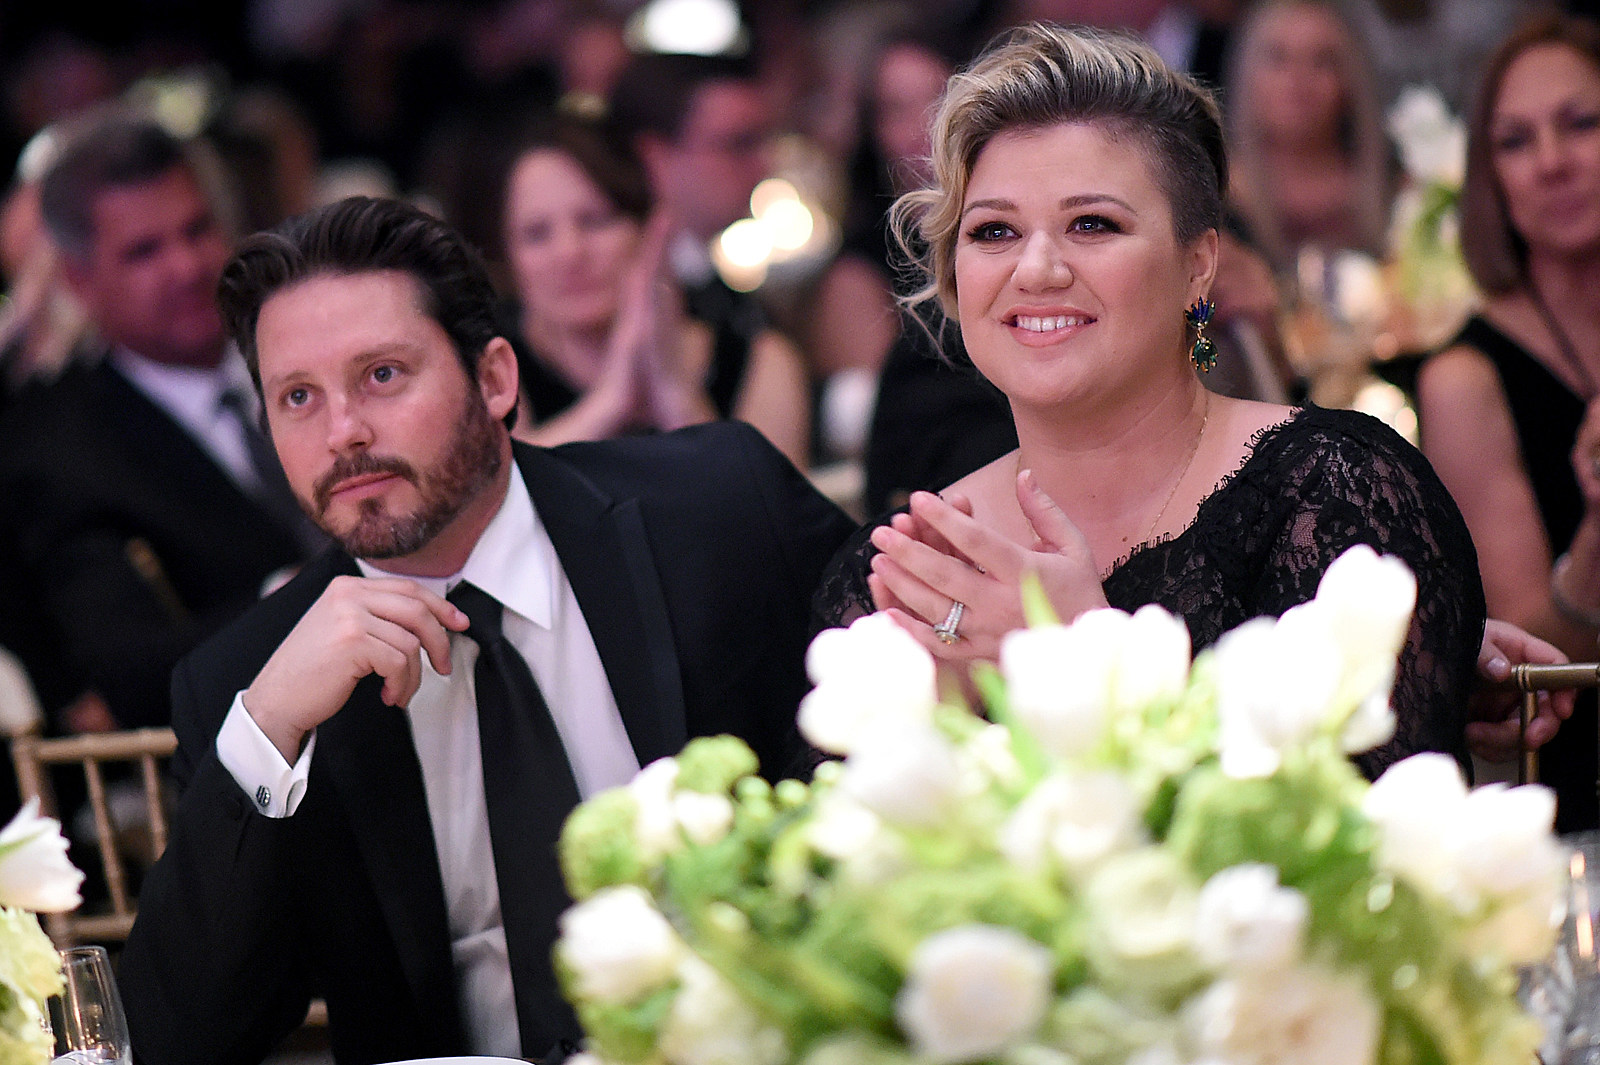 Kelly Clarkson Opens Up About Her Marriage + Divorce in New Songs